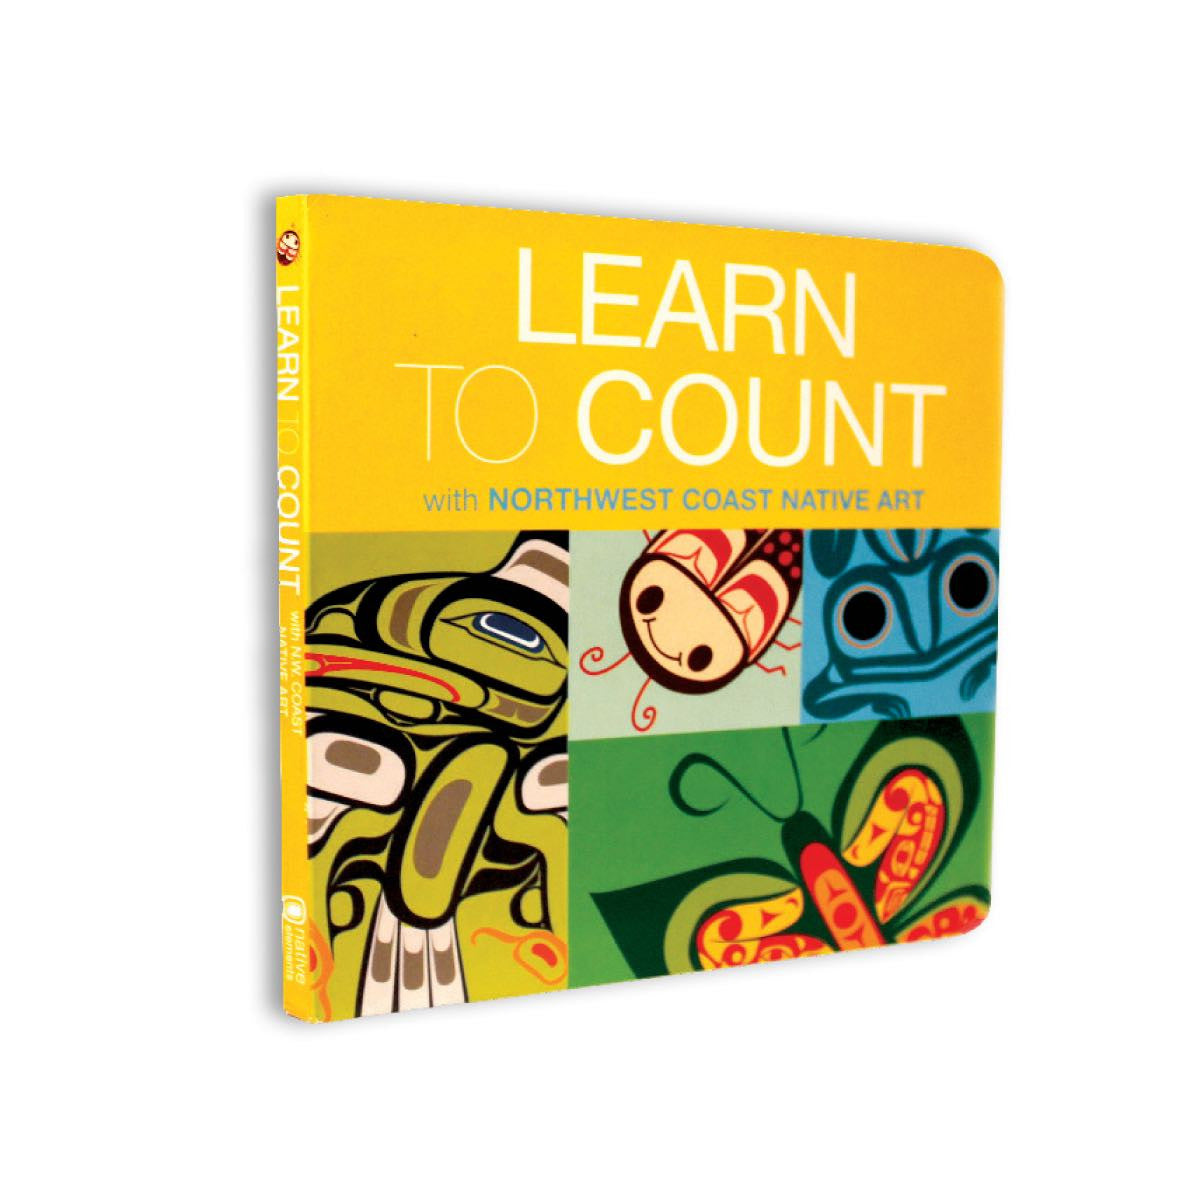 Learn to Count